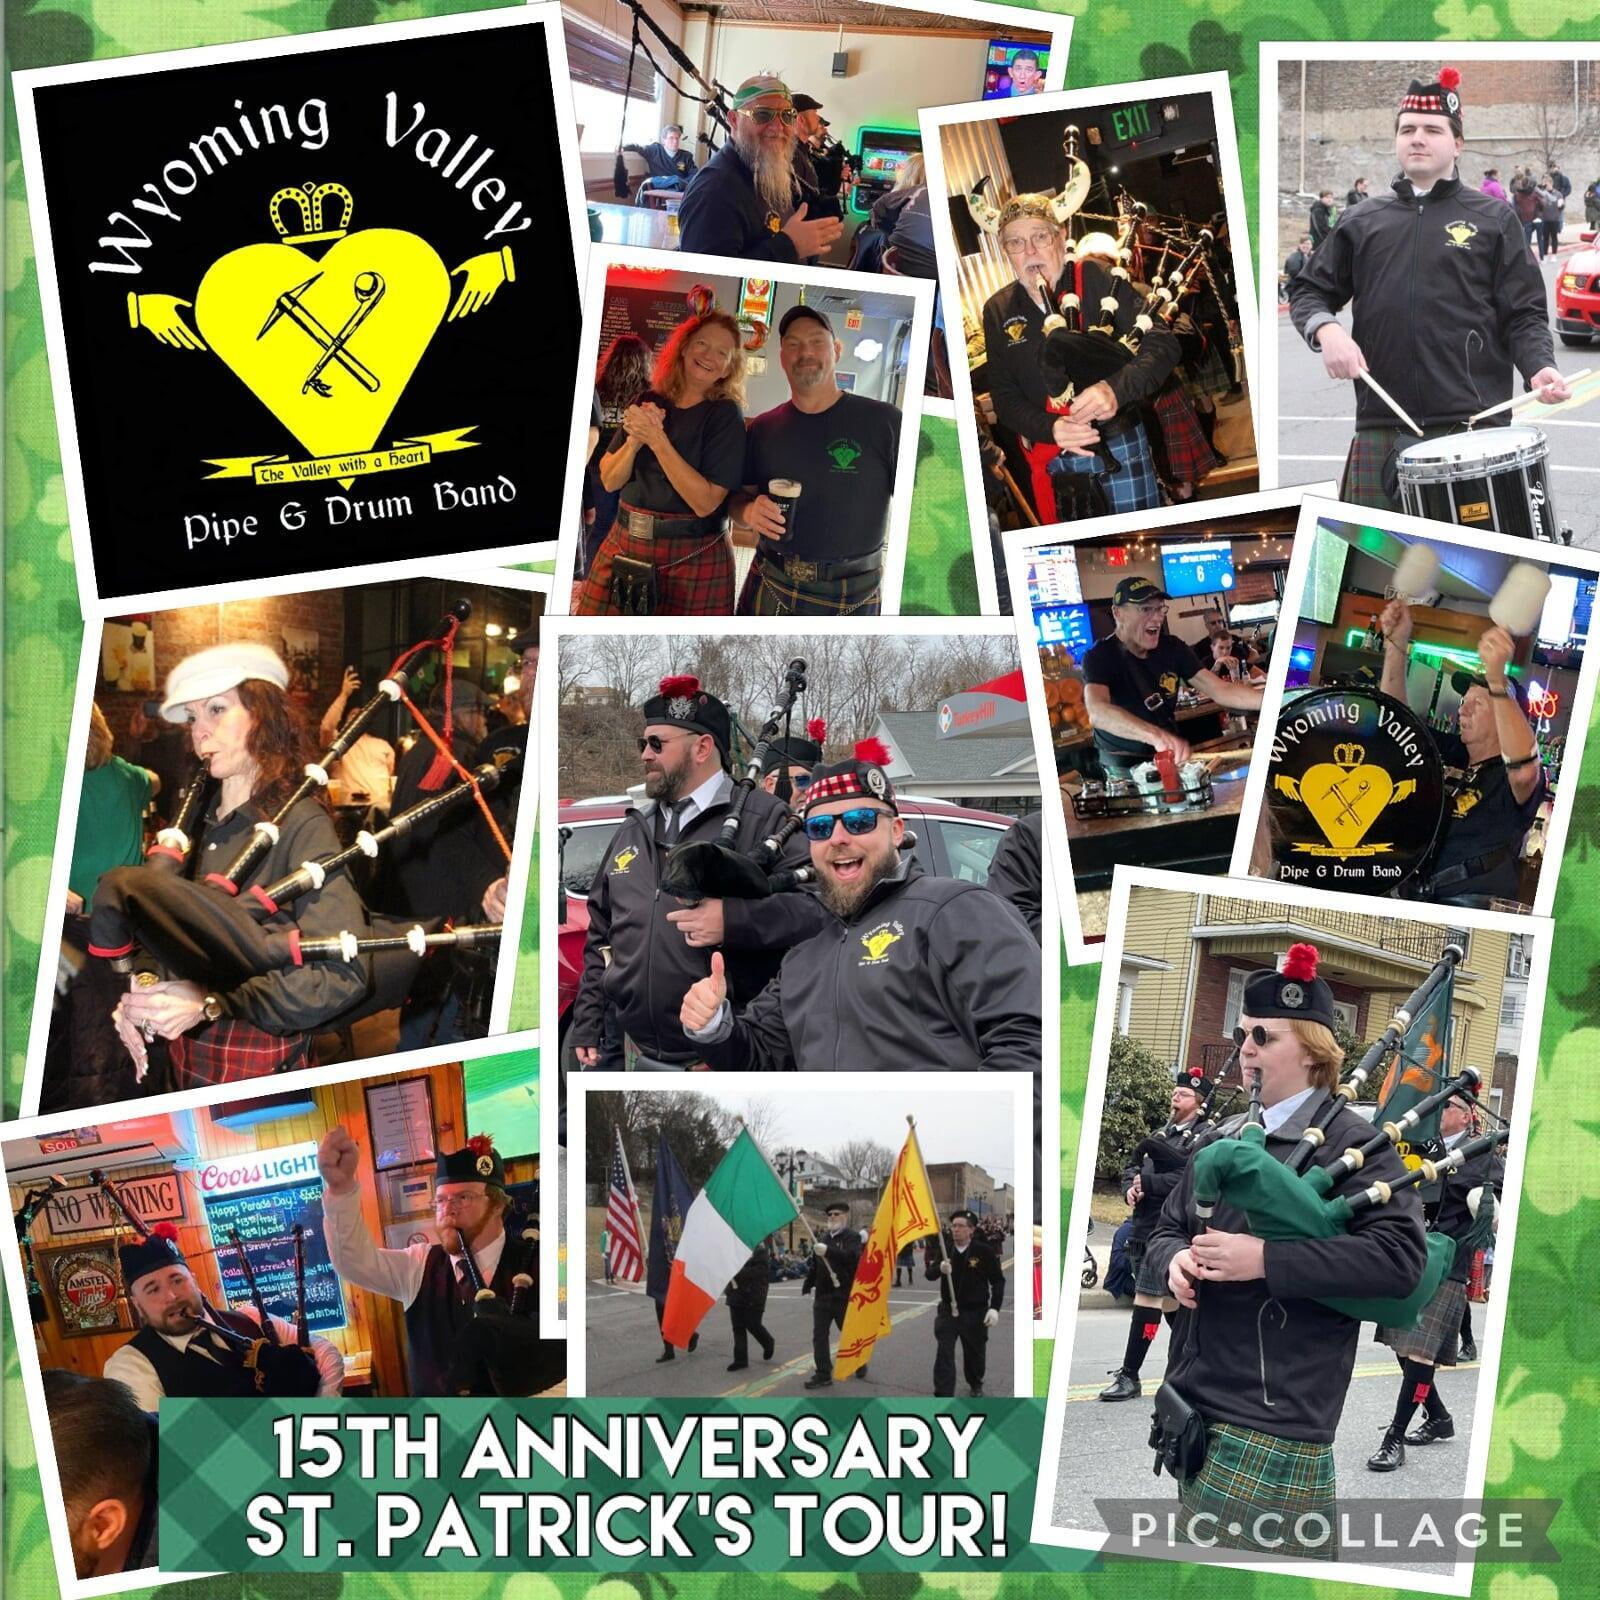 Wyoming Valley Pipe & Drum Band 2023 St. Patrick's Tour!